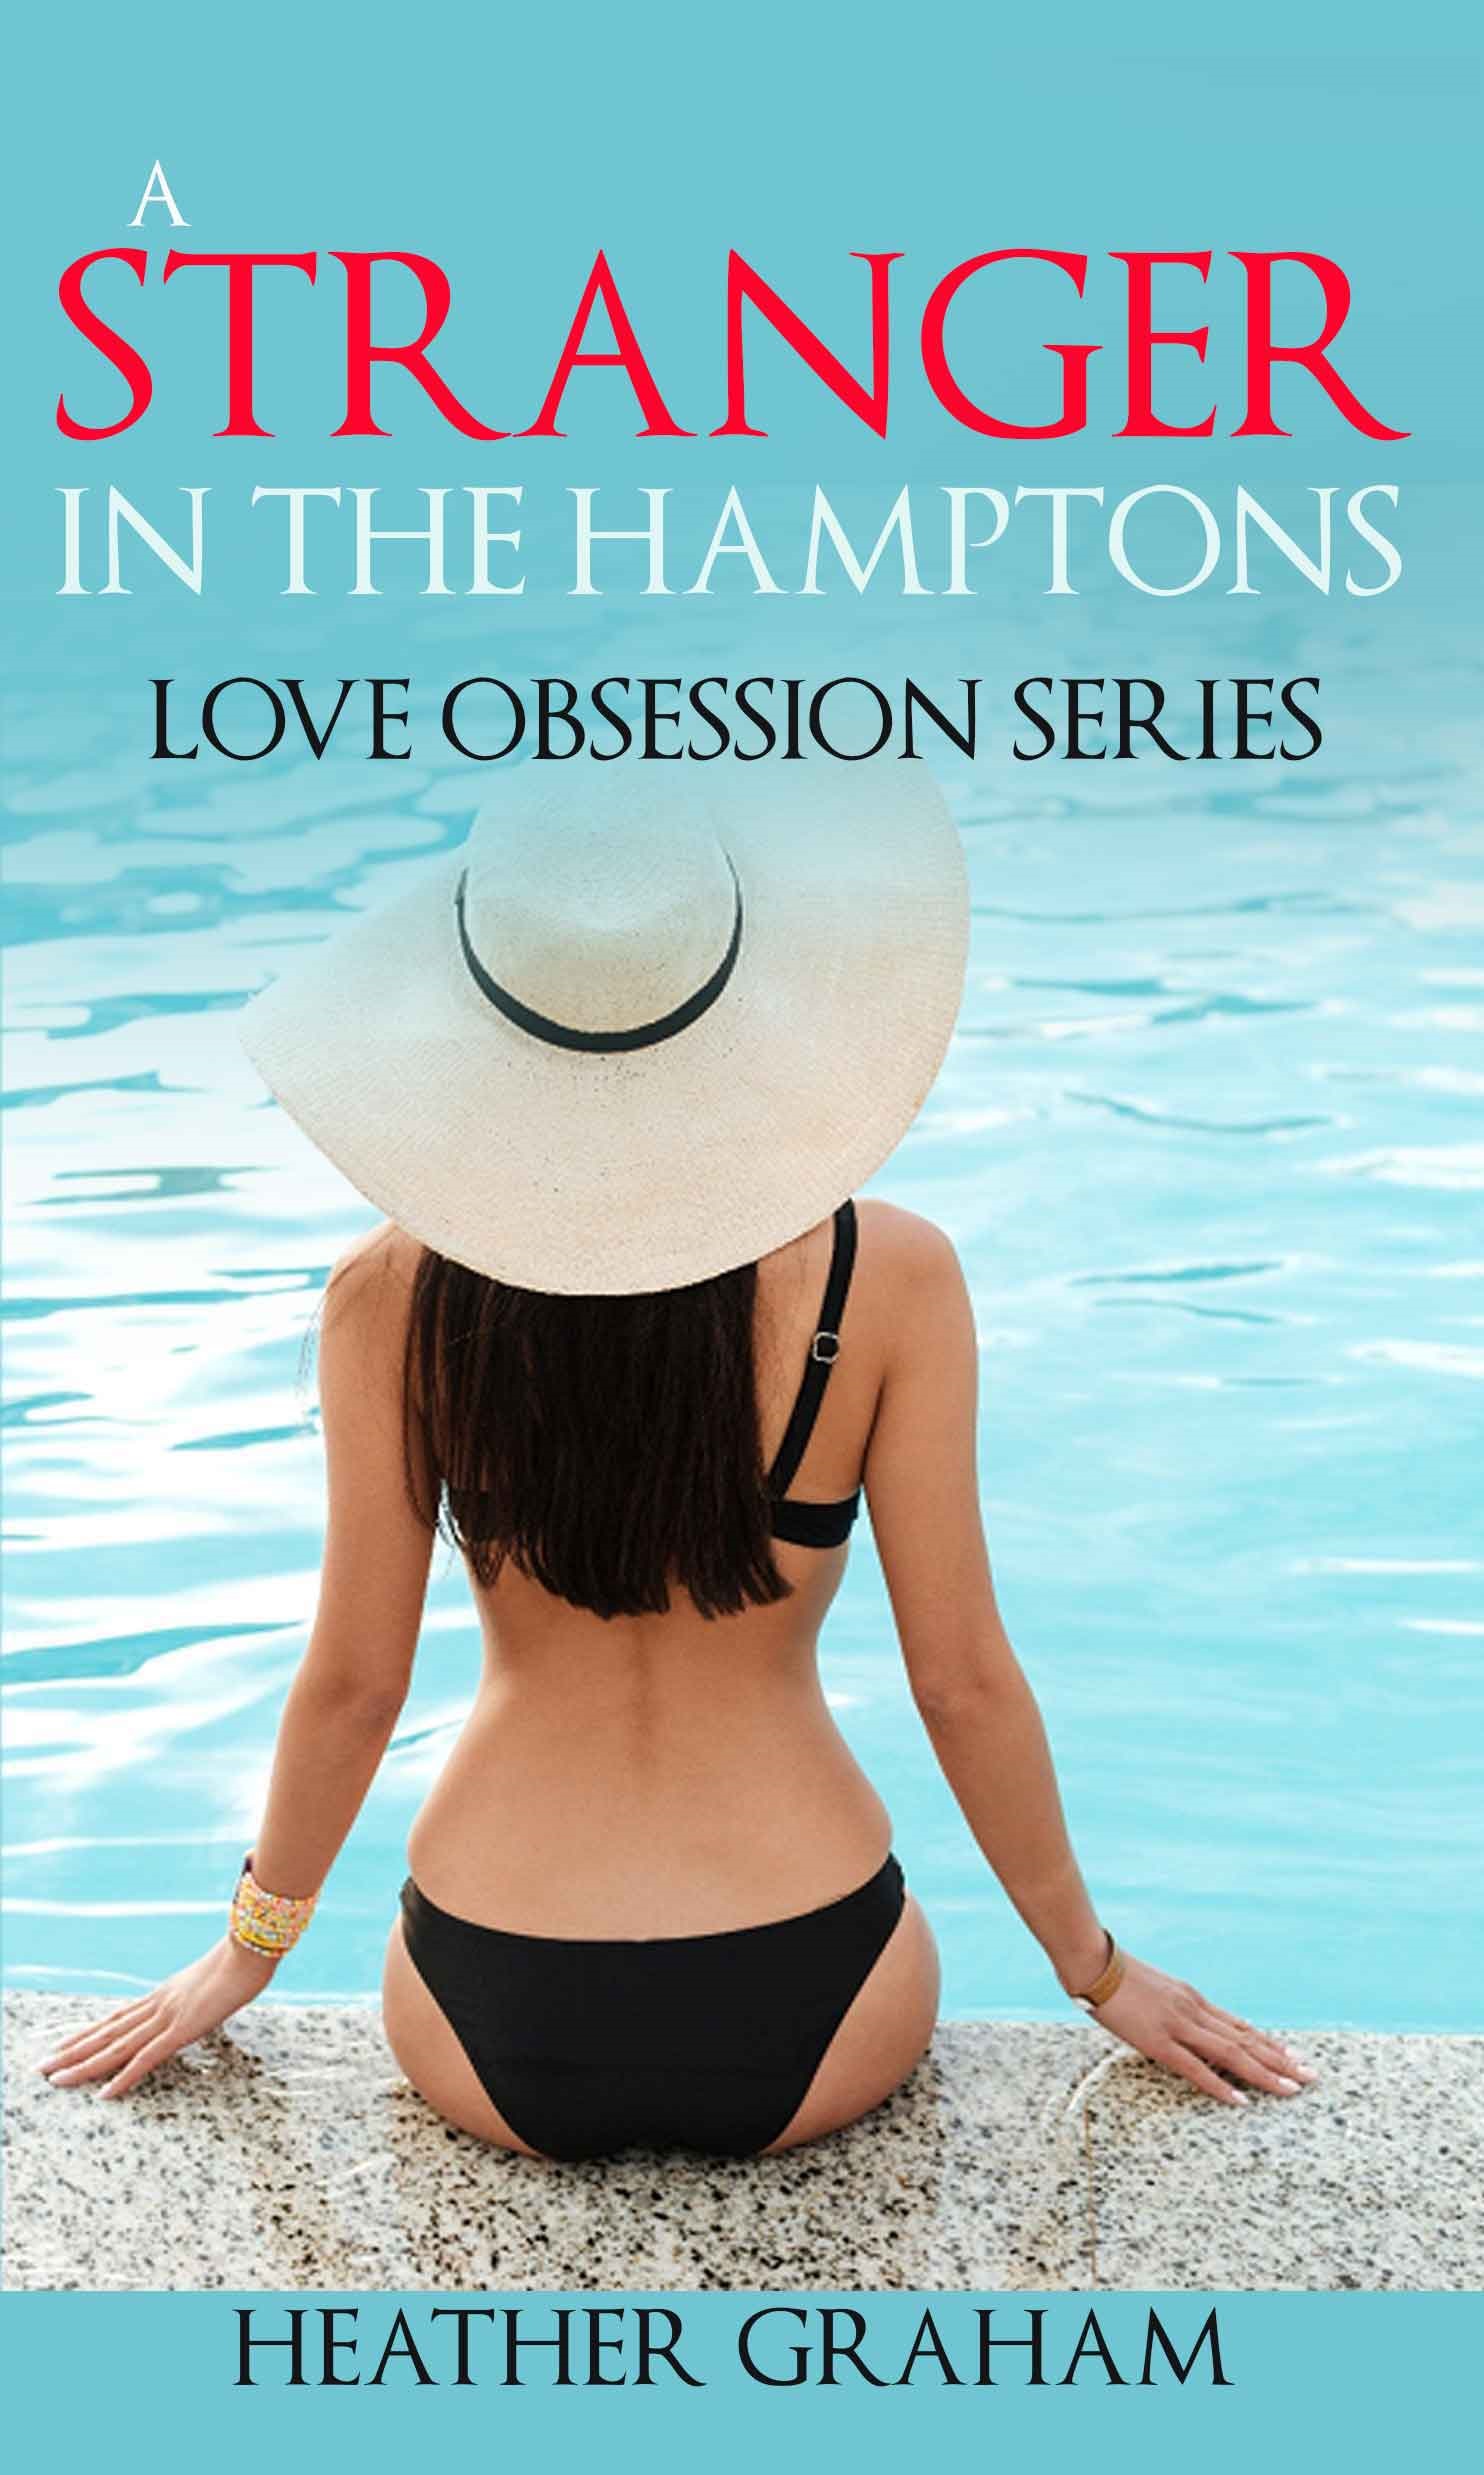 FREE: A Stranger in the Hamptons by Heather Graham